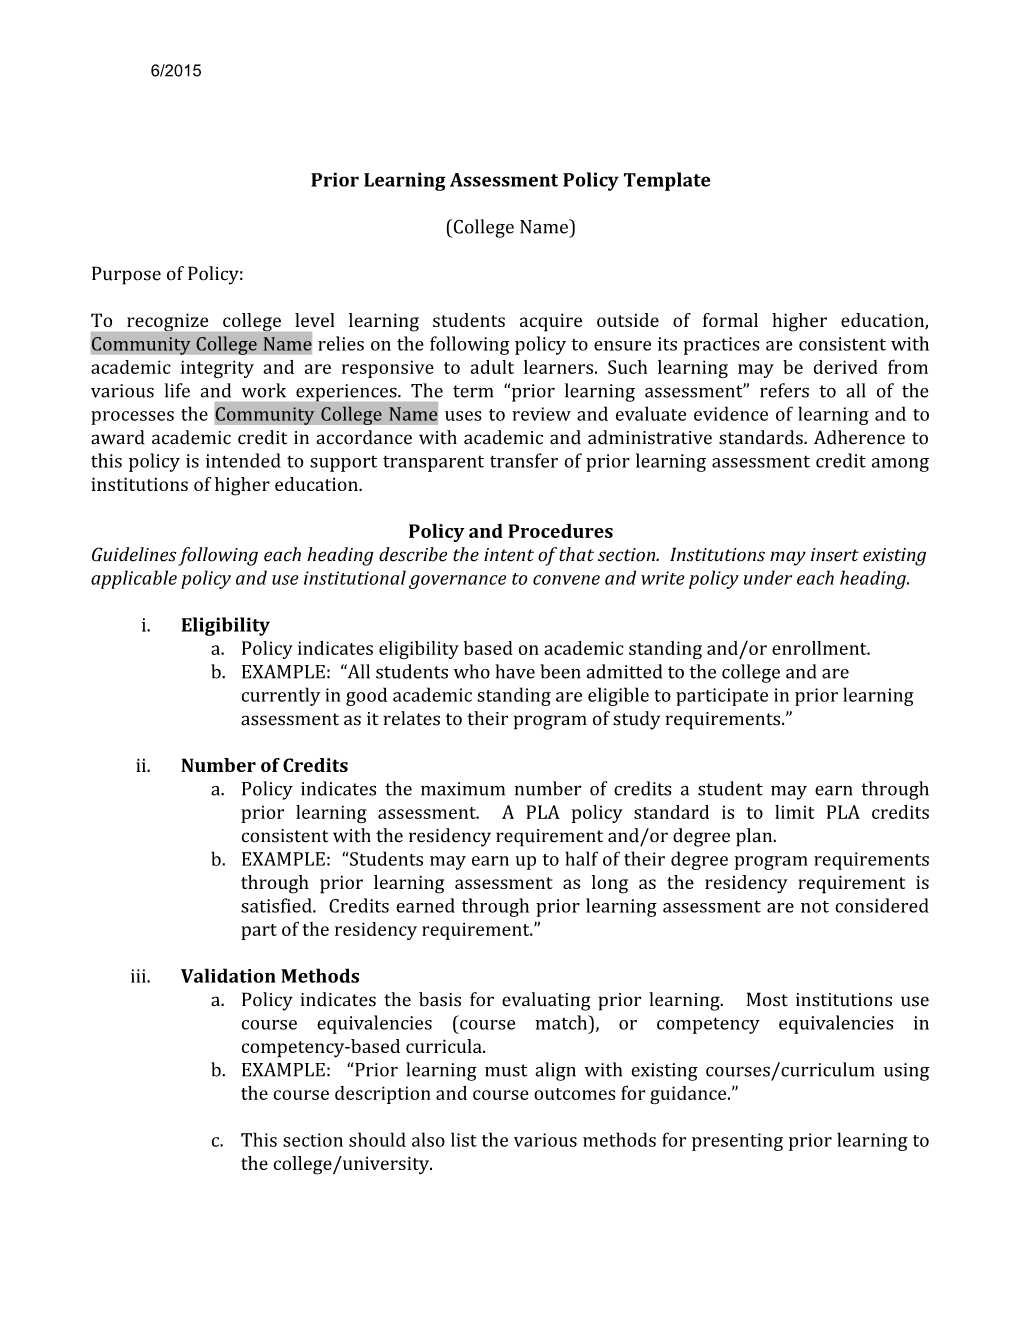 Prior Learning Assessment Policy Template